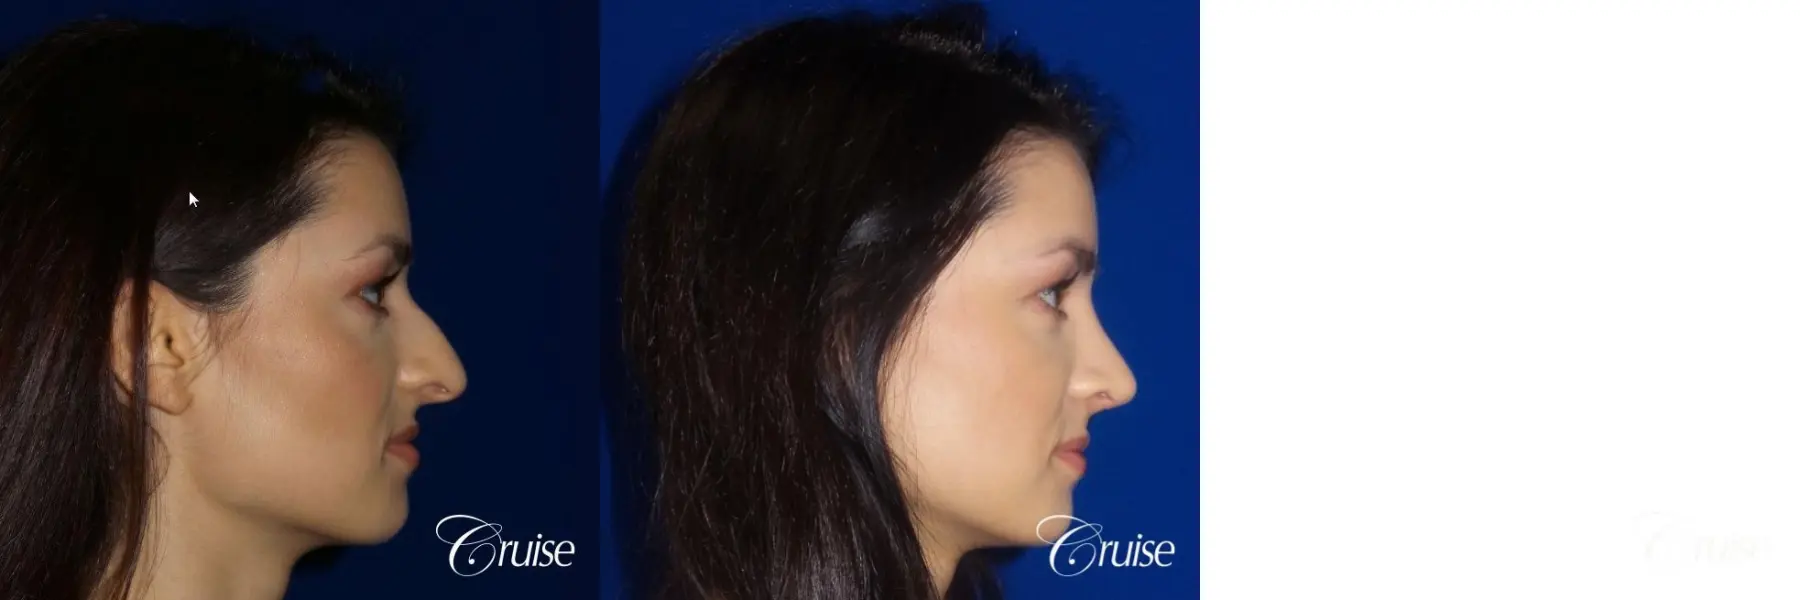 Rhinoplasty specialist Orange County CA - Before and After 4